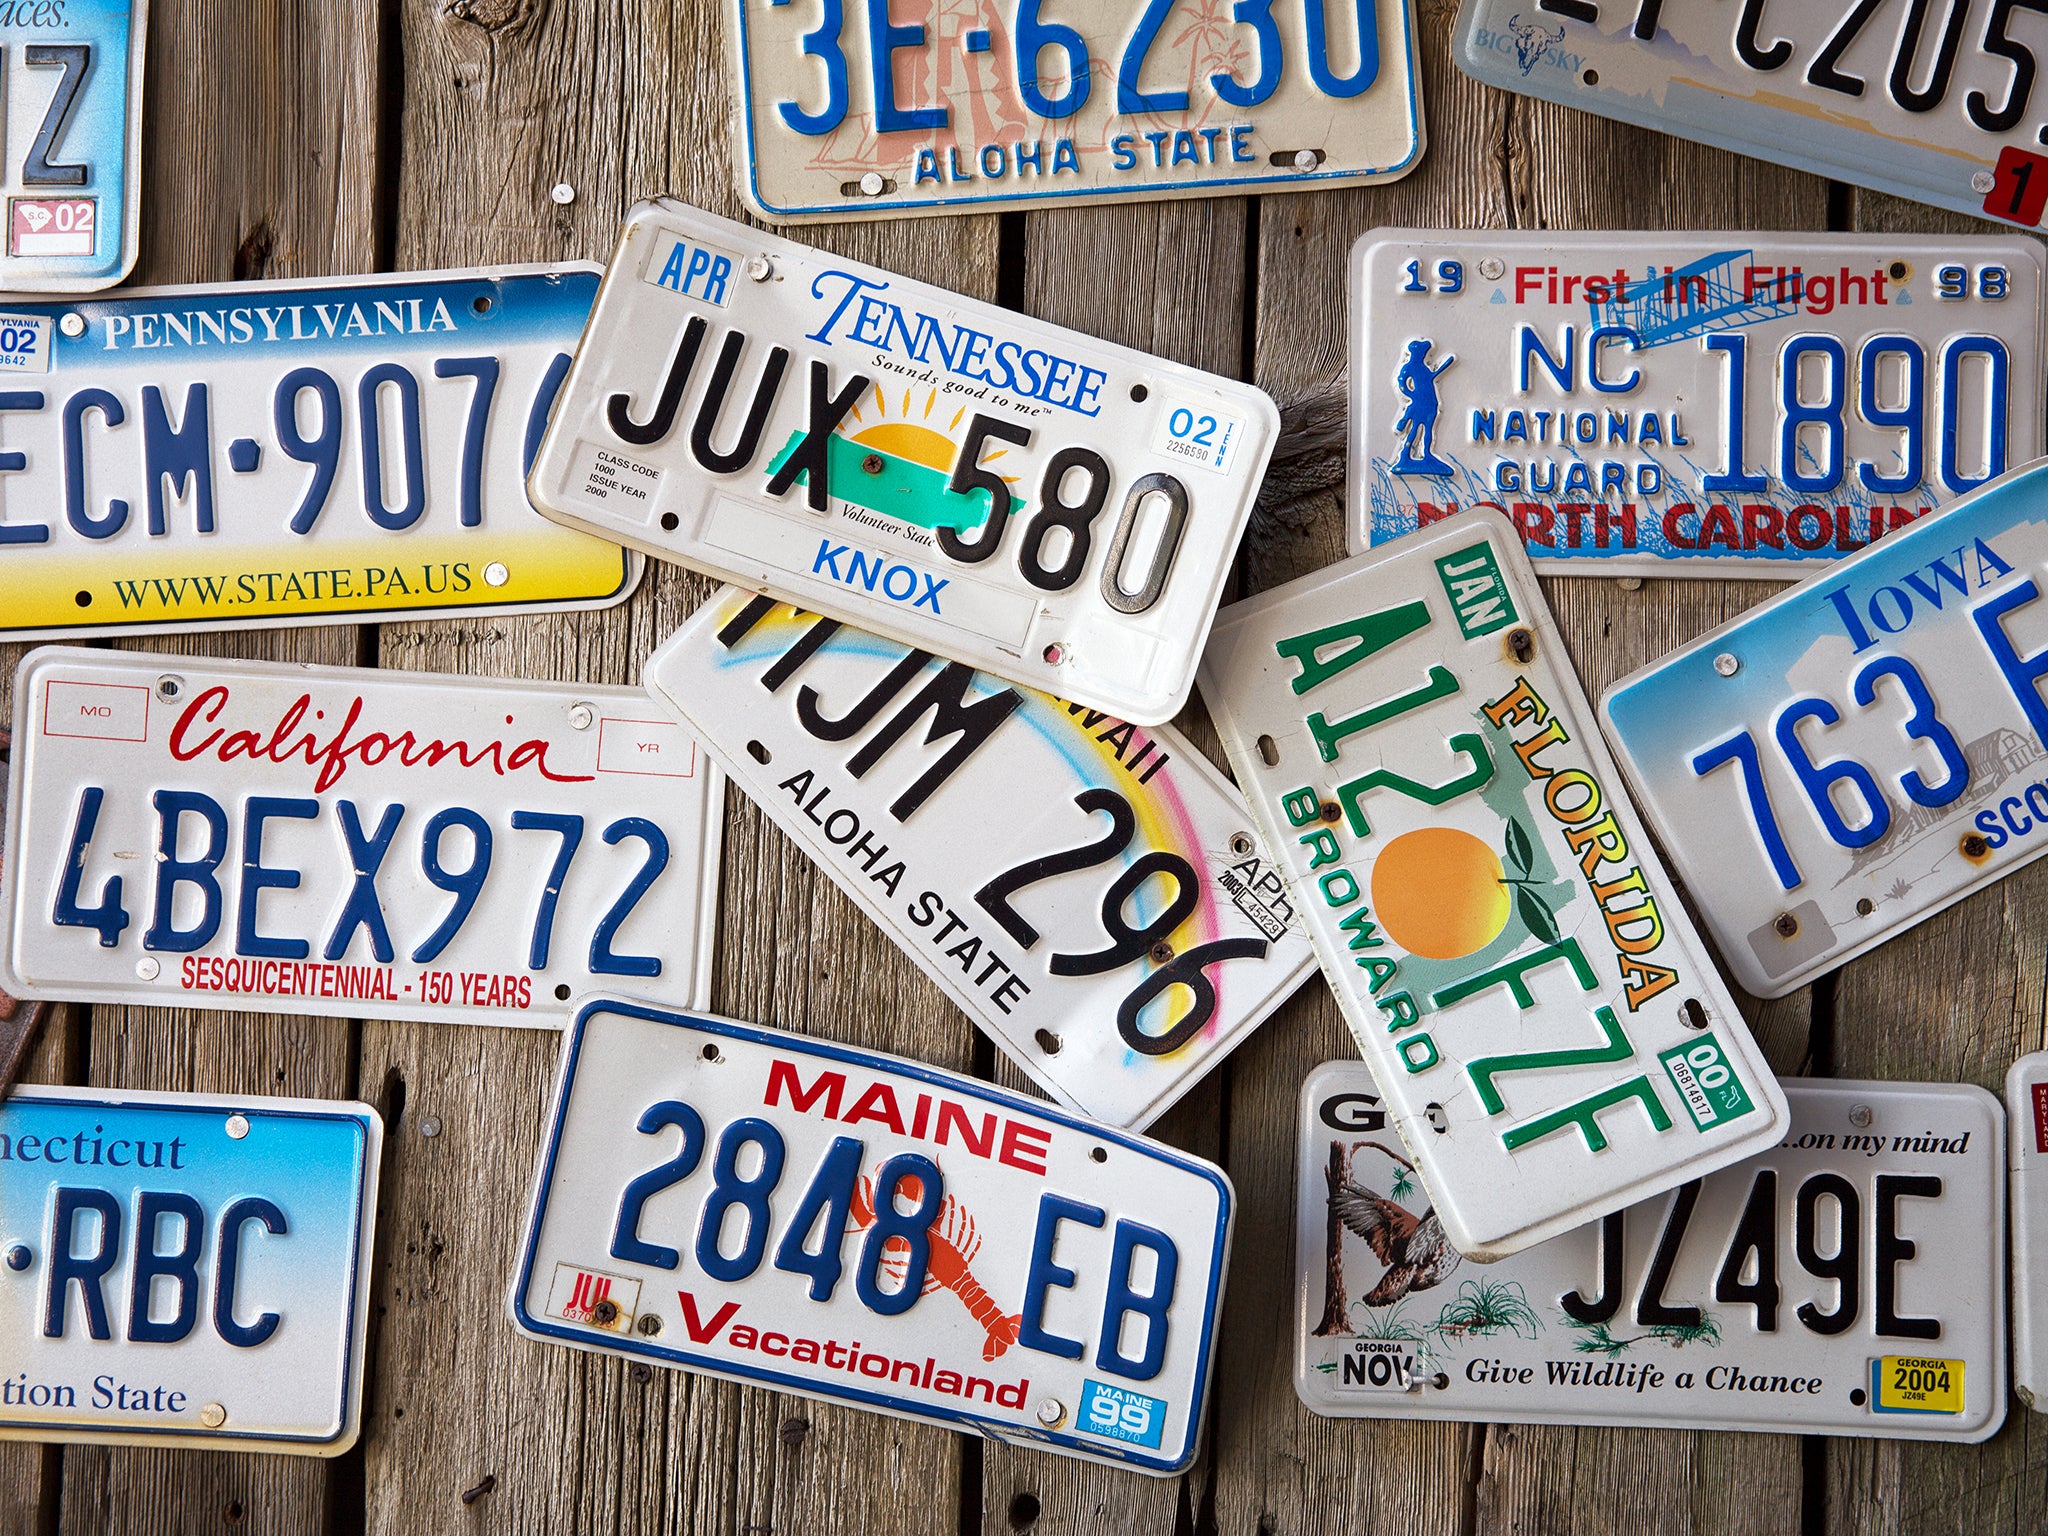 Hundreds Of Vehicles Recalled In Kansas After Number Plates Spell Images, Photos, Reviews